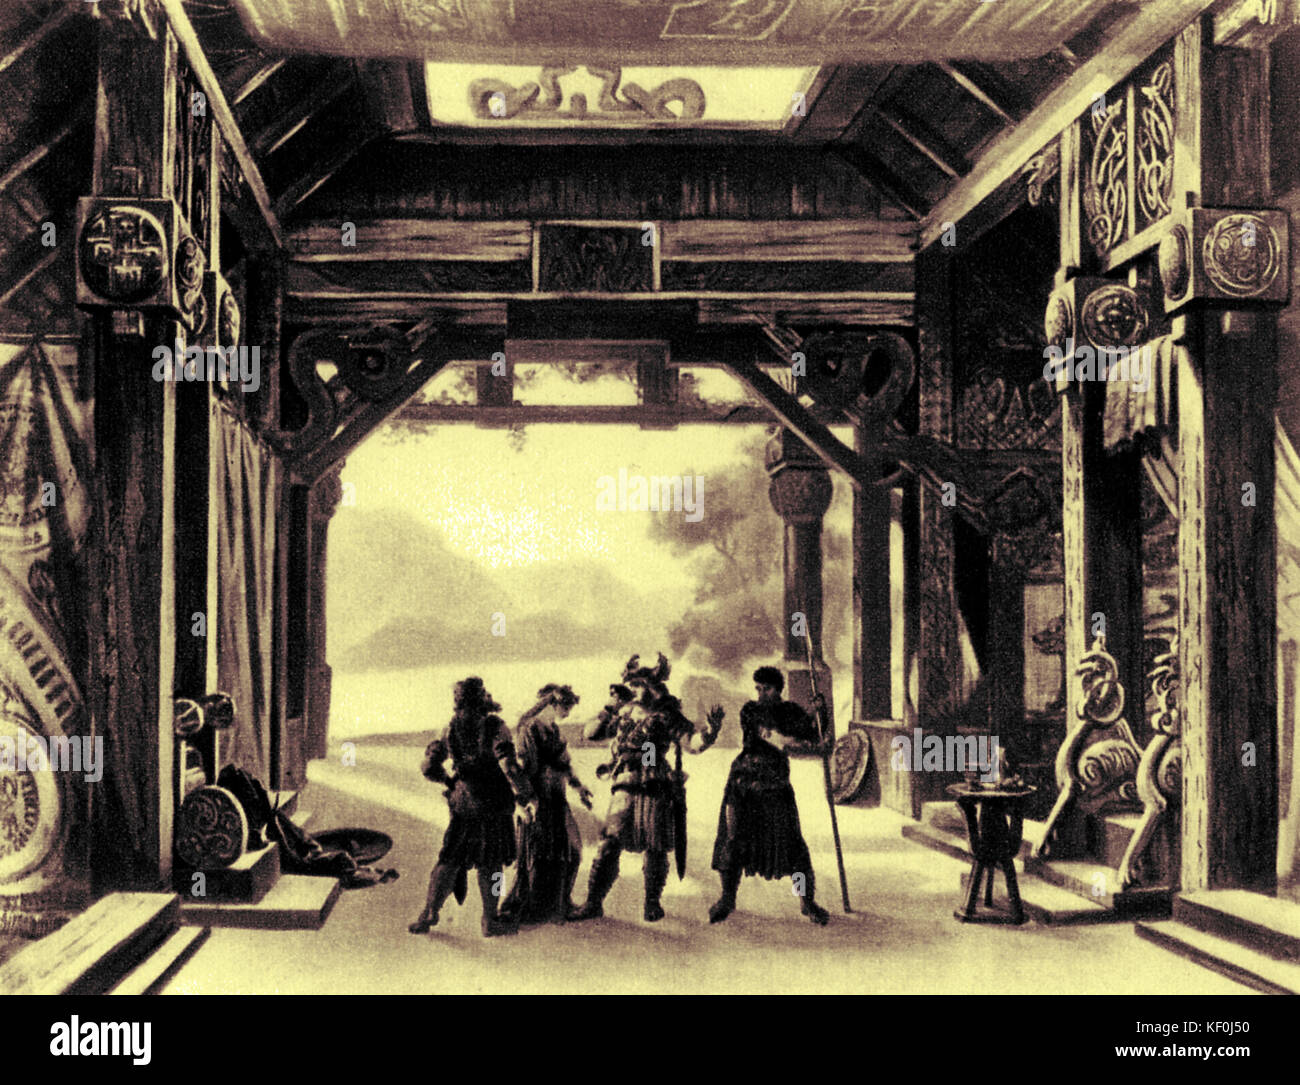 The Twilight of the Gods / Göttterdämmerung by Richard Wagner. Set design by Josef Hoffmann. Caption: The Hall of the Gibichung.  RW: German composer & author, 22 May 1813 - 13 February 1883. Tinted version. Stock Photo